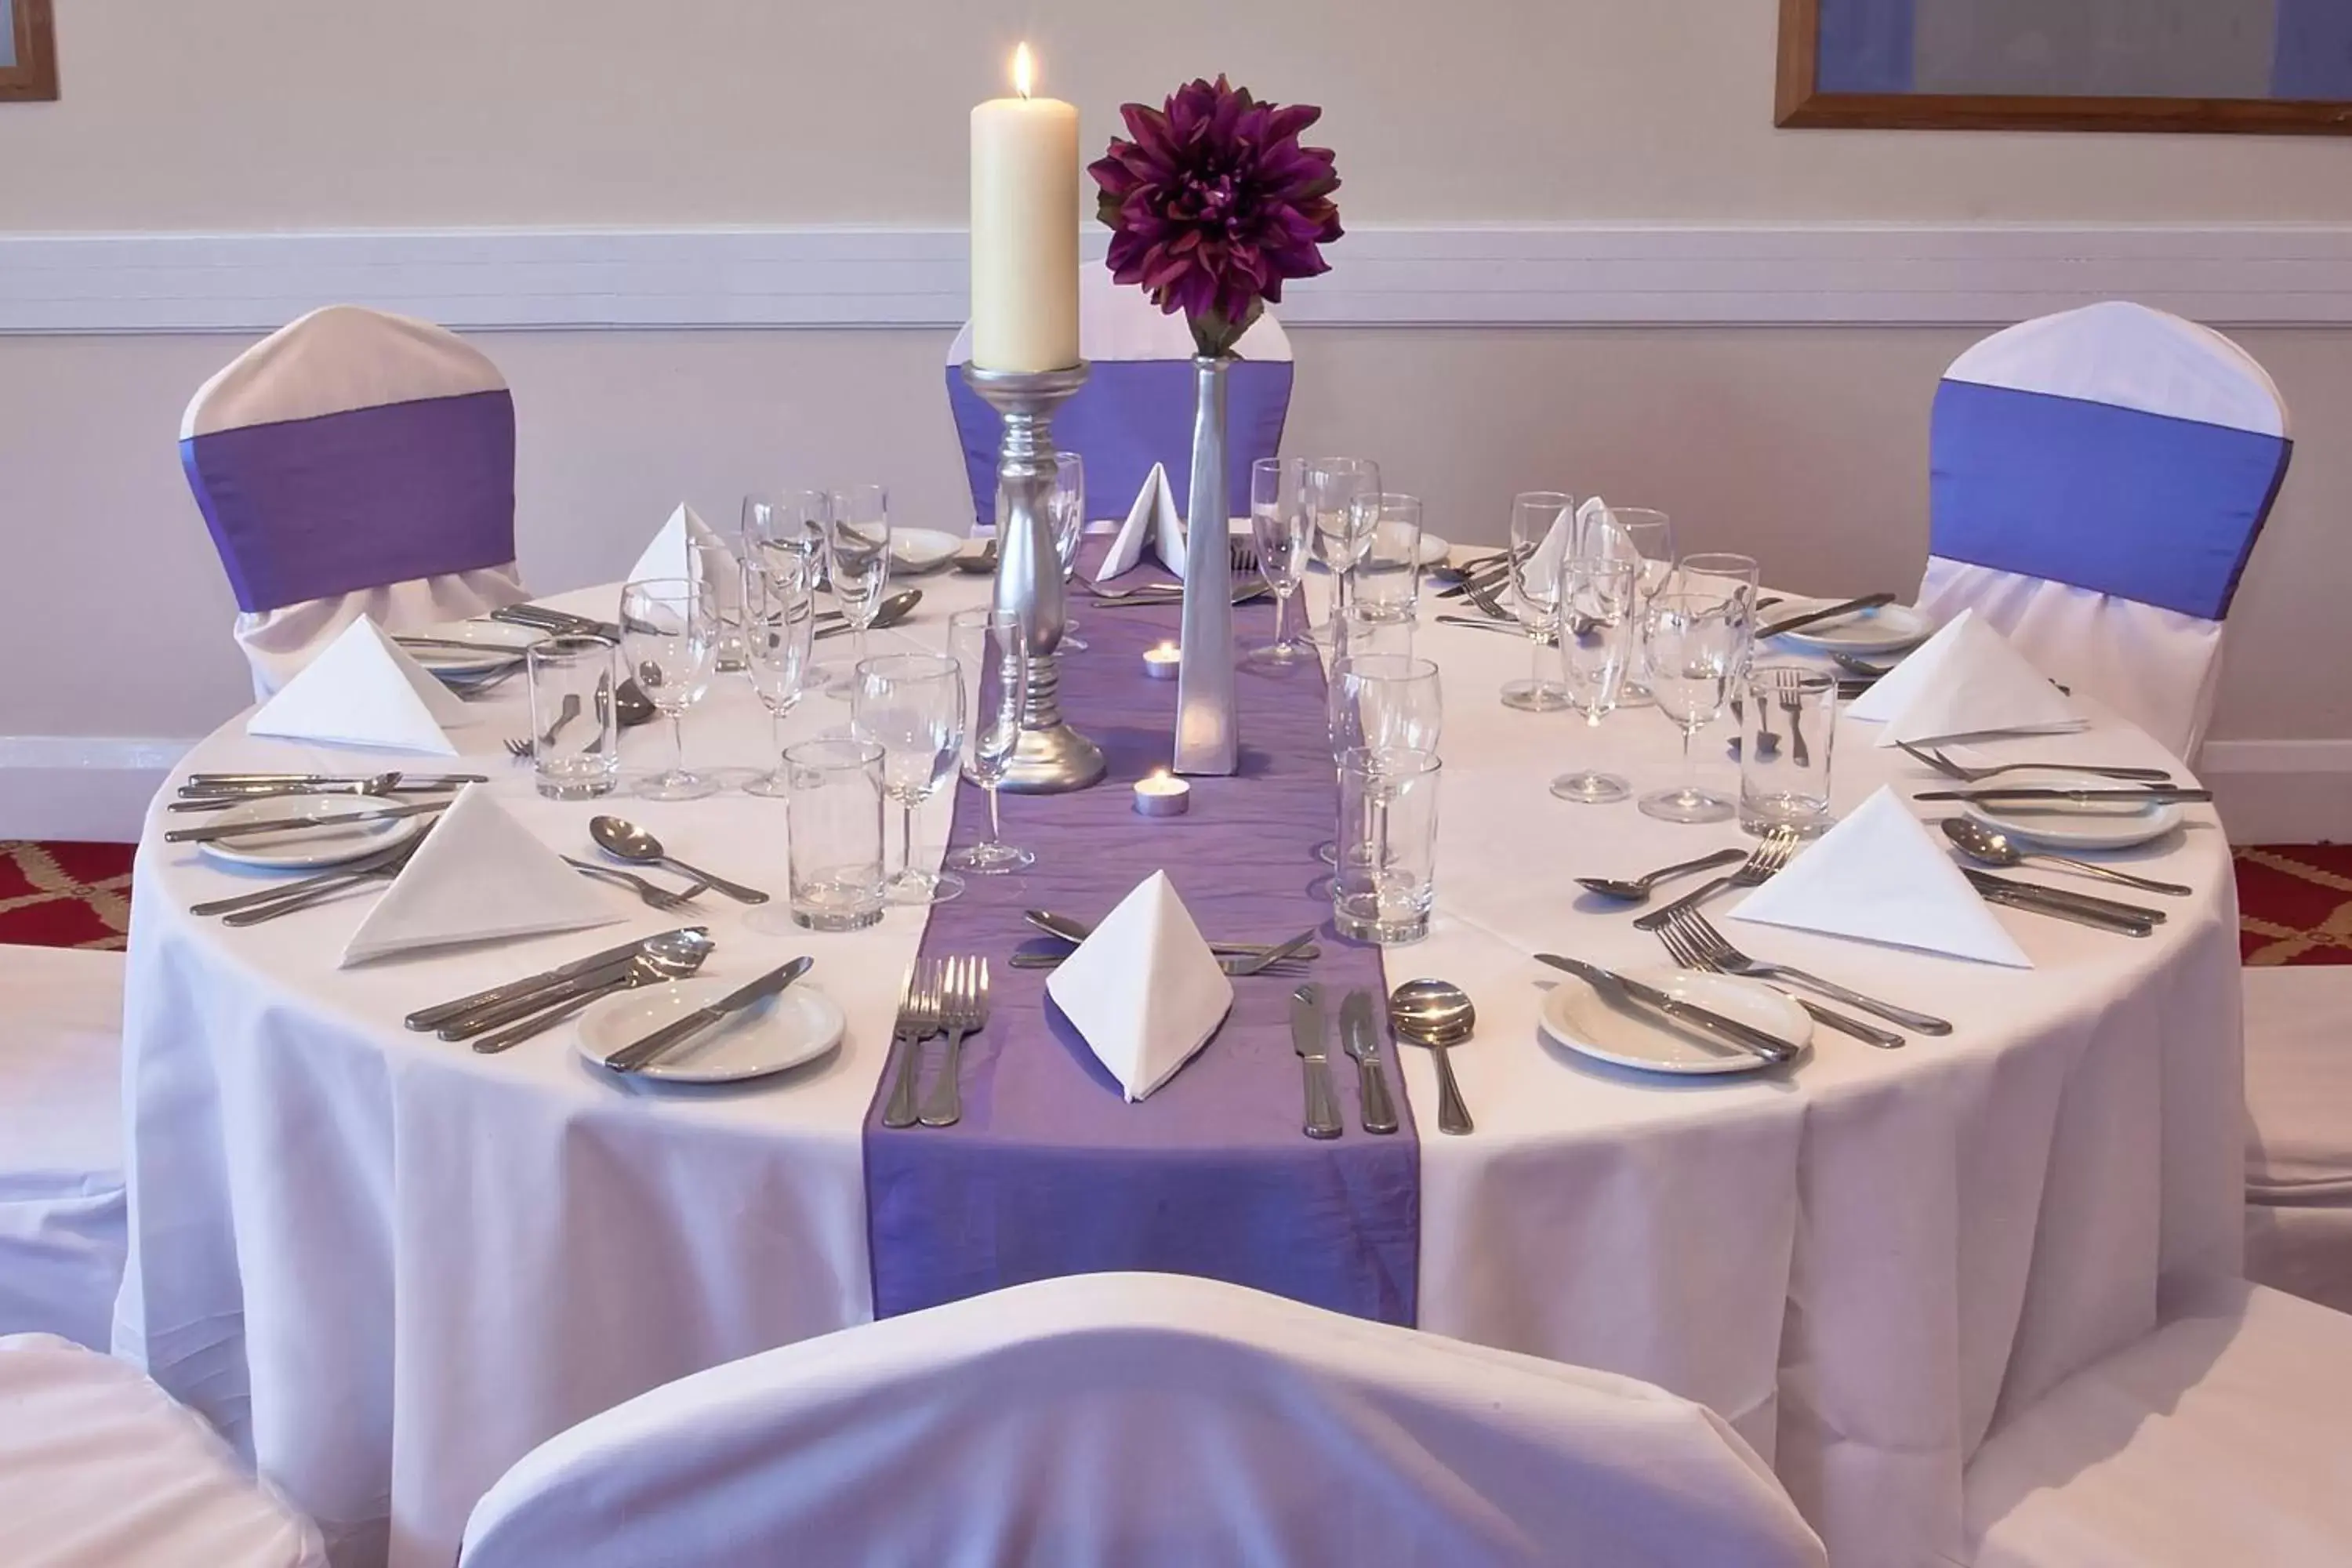 Banquet/Function facilities, Banquet Facilities in Airport Hotel Manchester